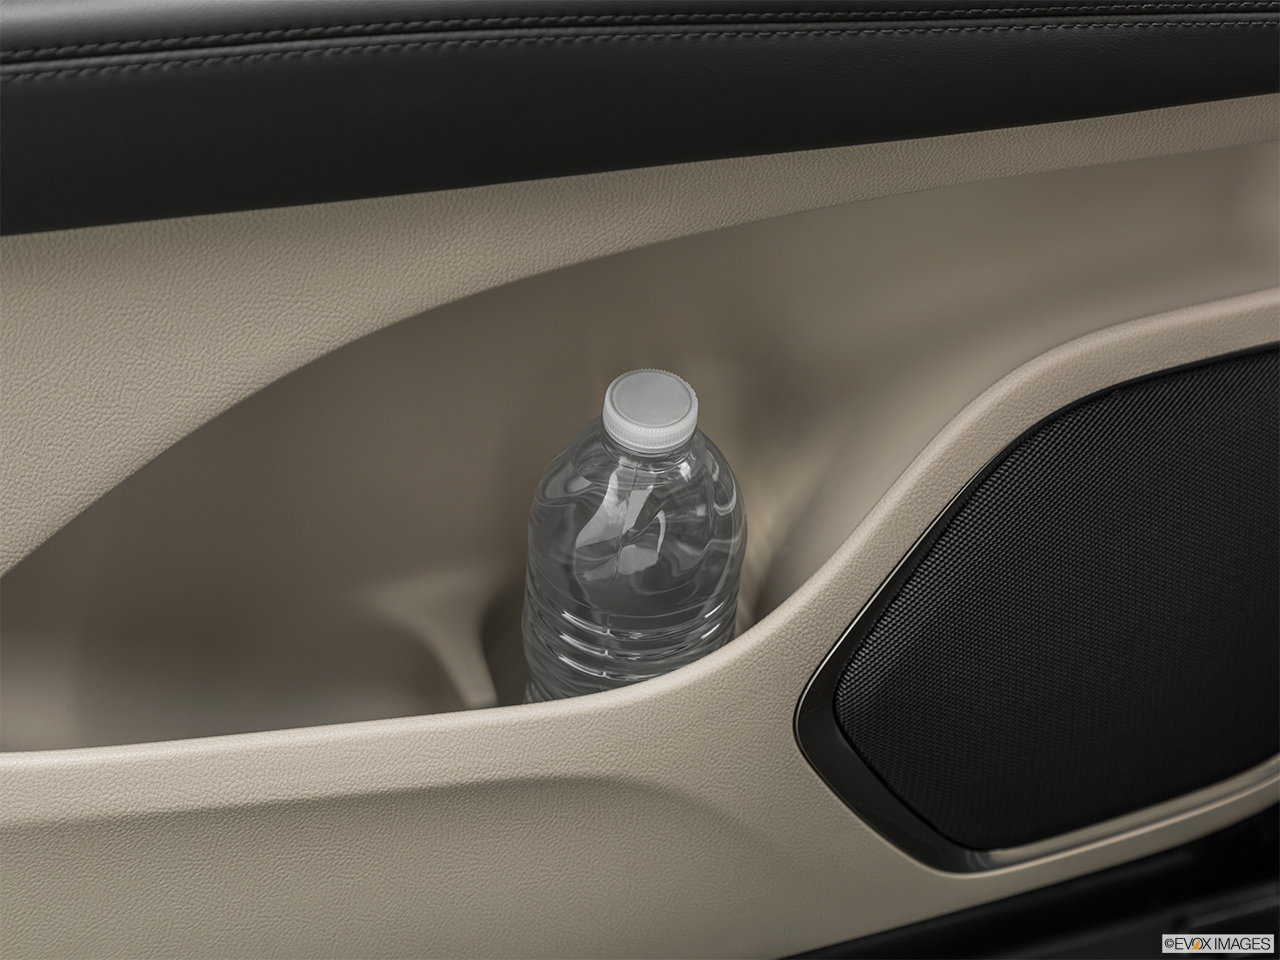 2020 Lincoln Nautilus Reserve Second row side cup holder with coffee prop, or second row door cup holder with water bottle. 